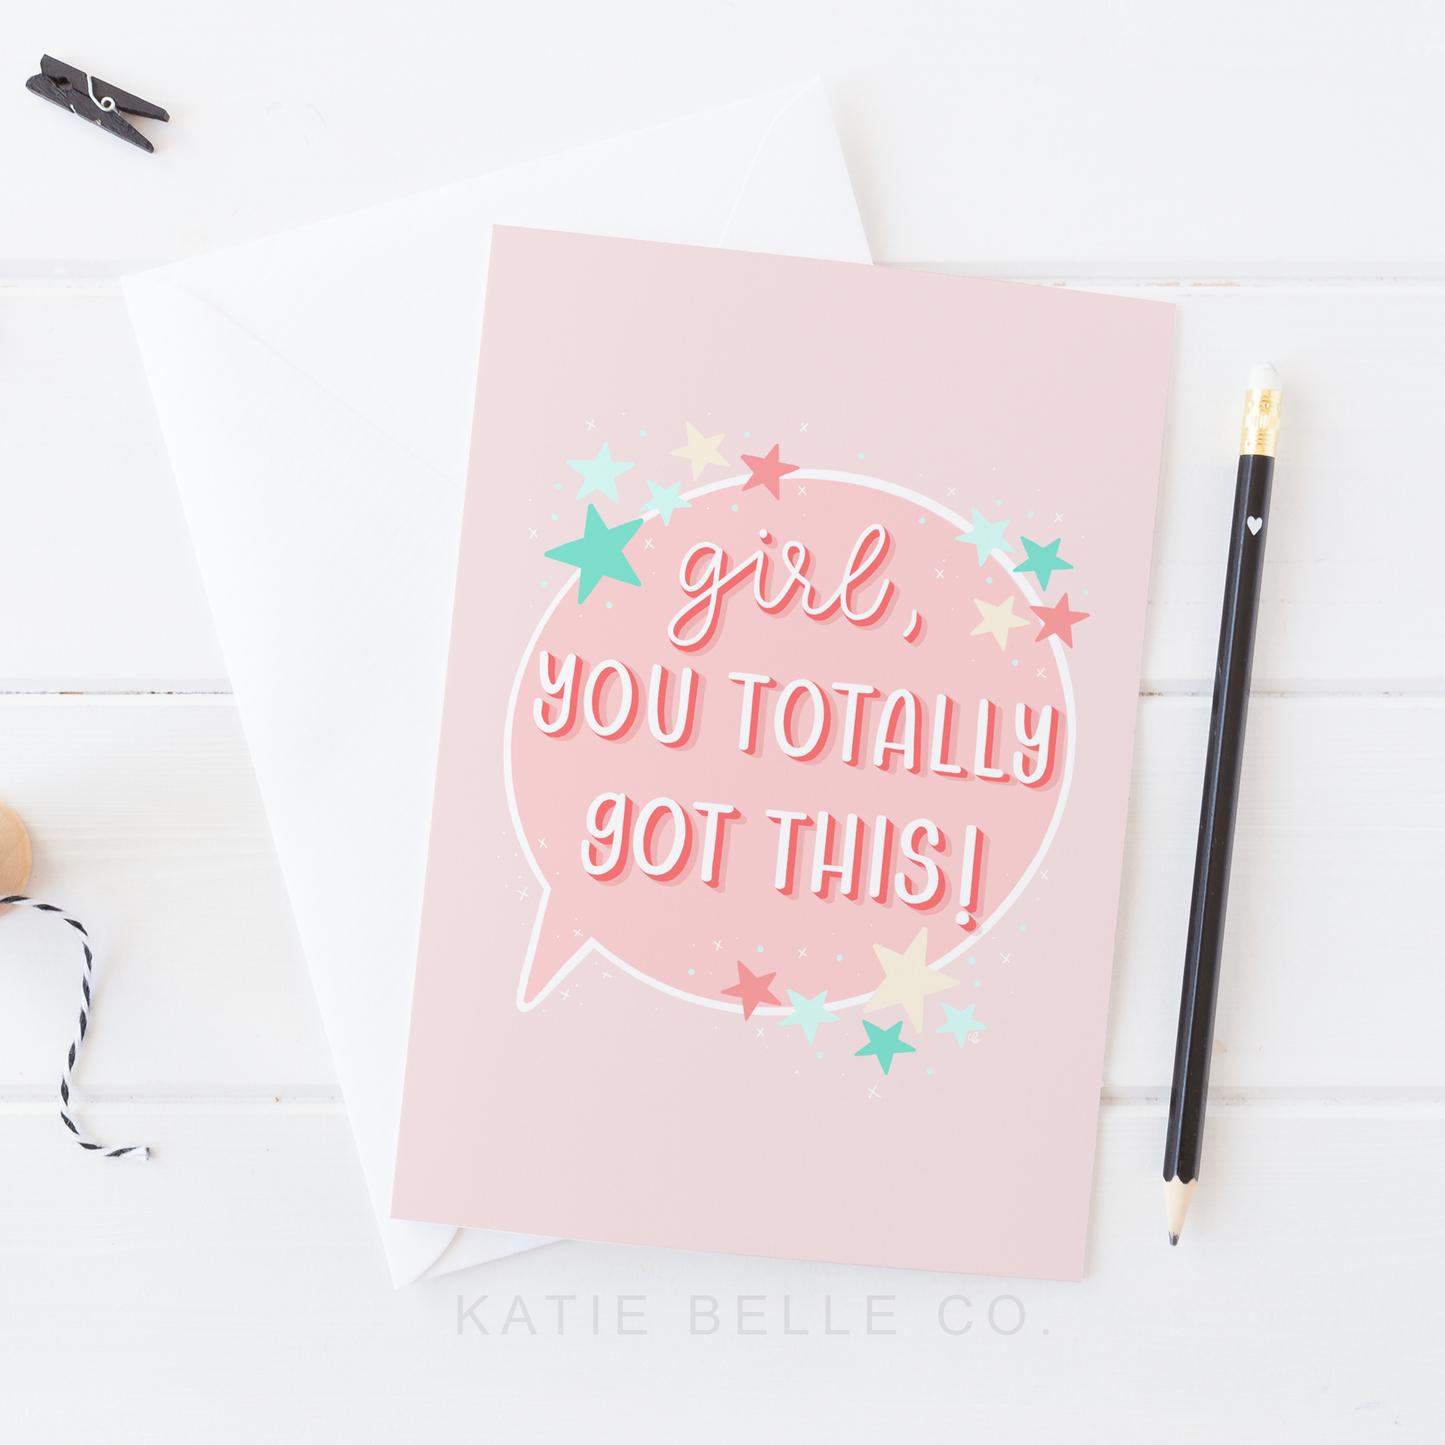 GIRL, YOU TOTALLY GOT THIS GREETING CARD - Old branding logo on back